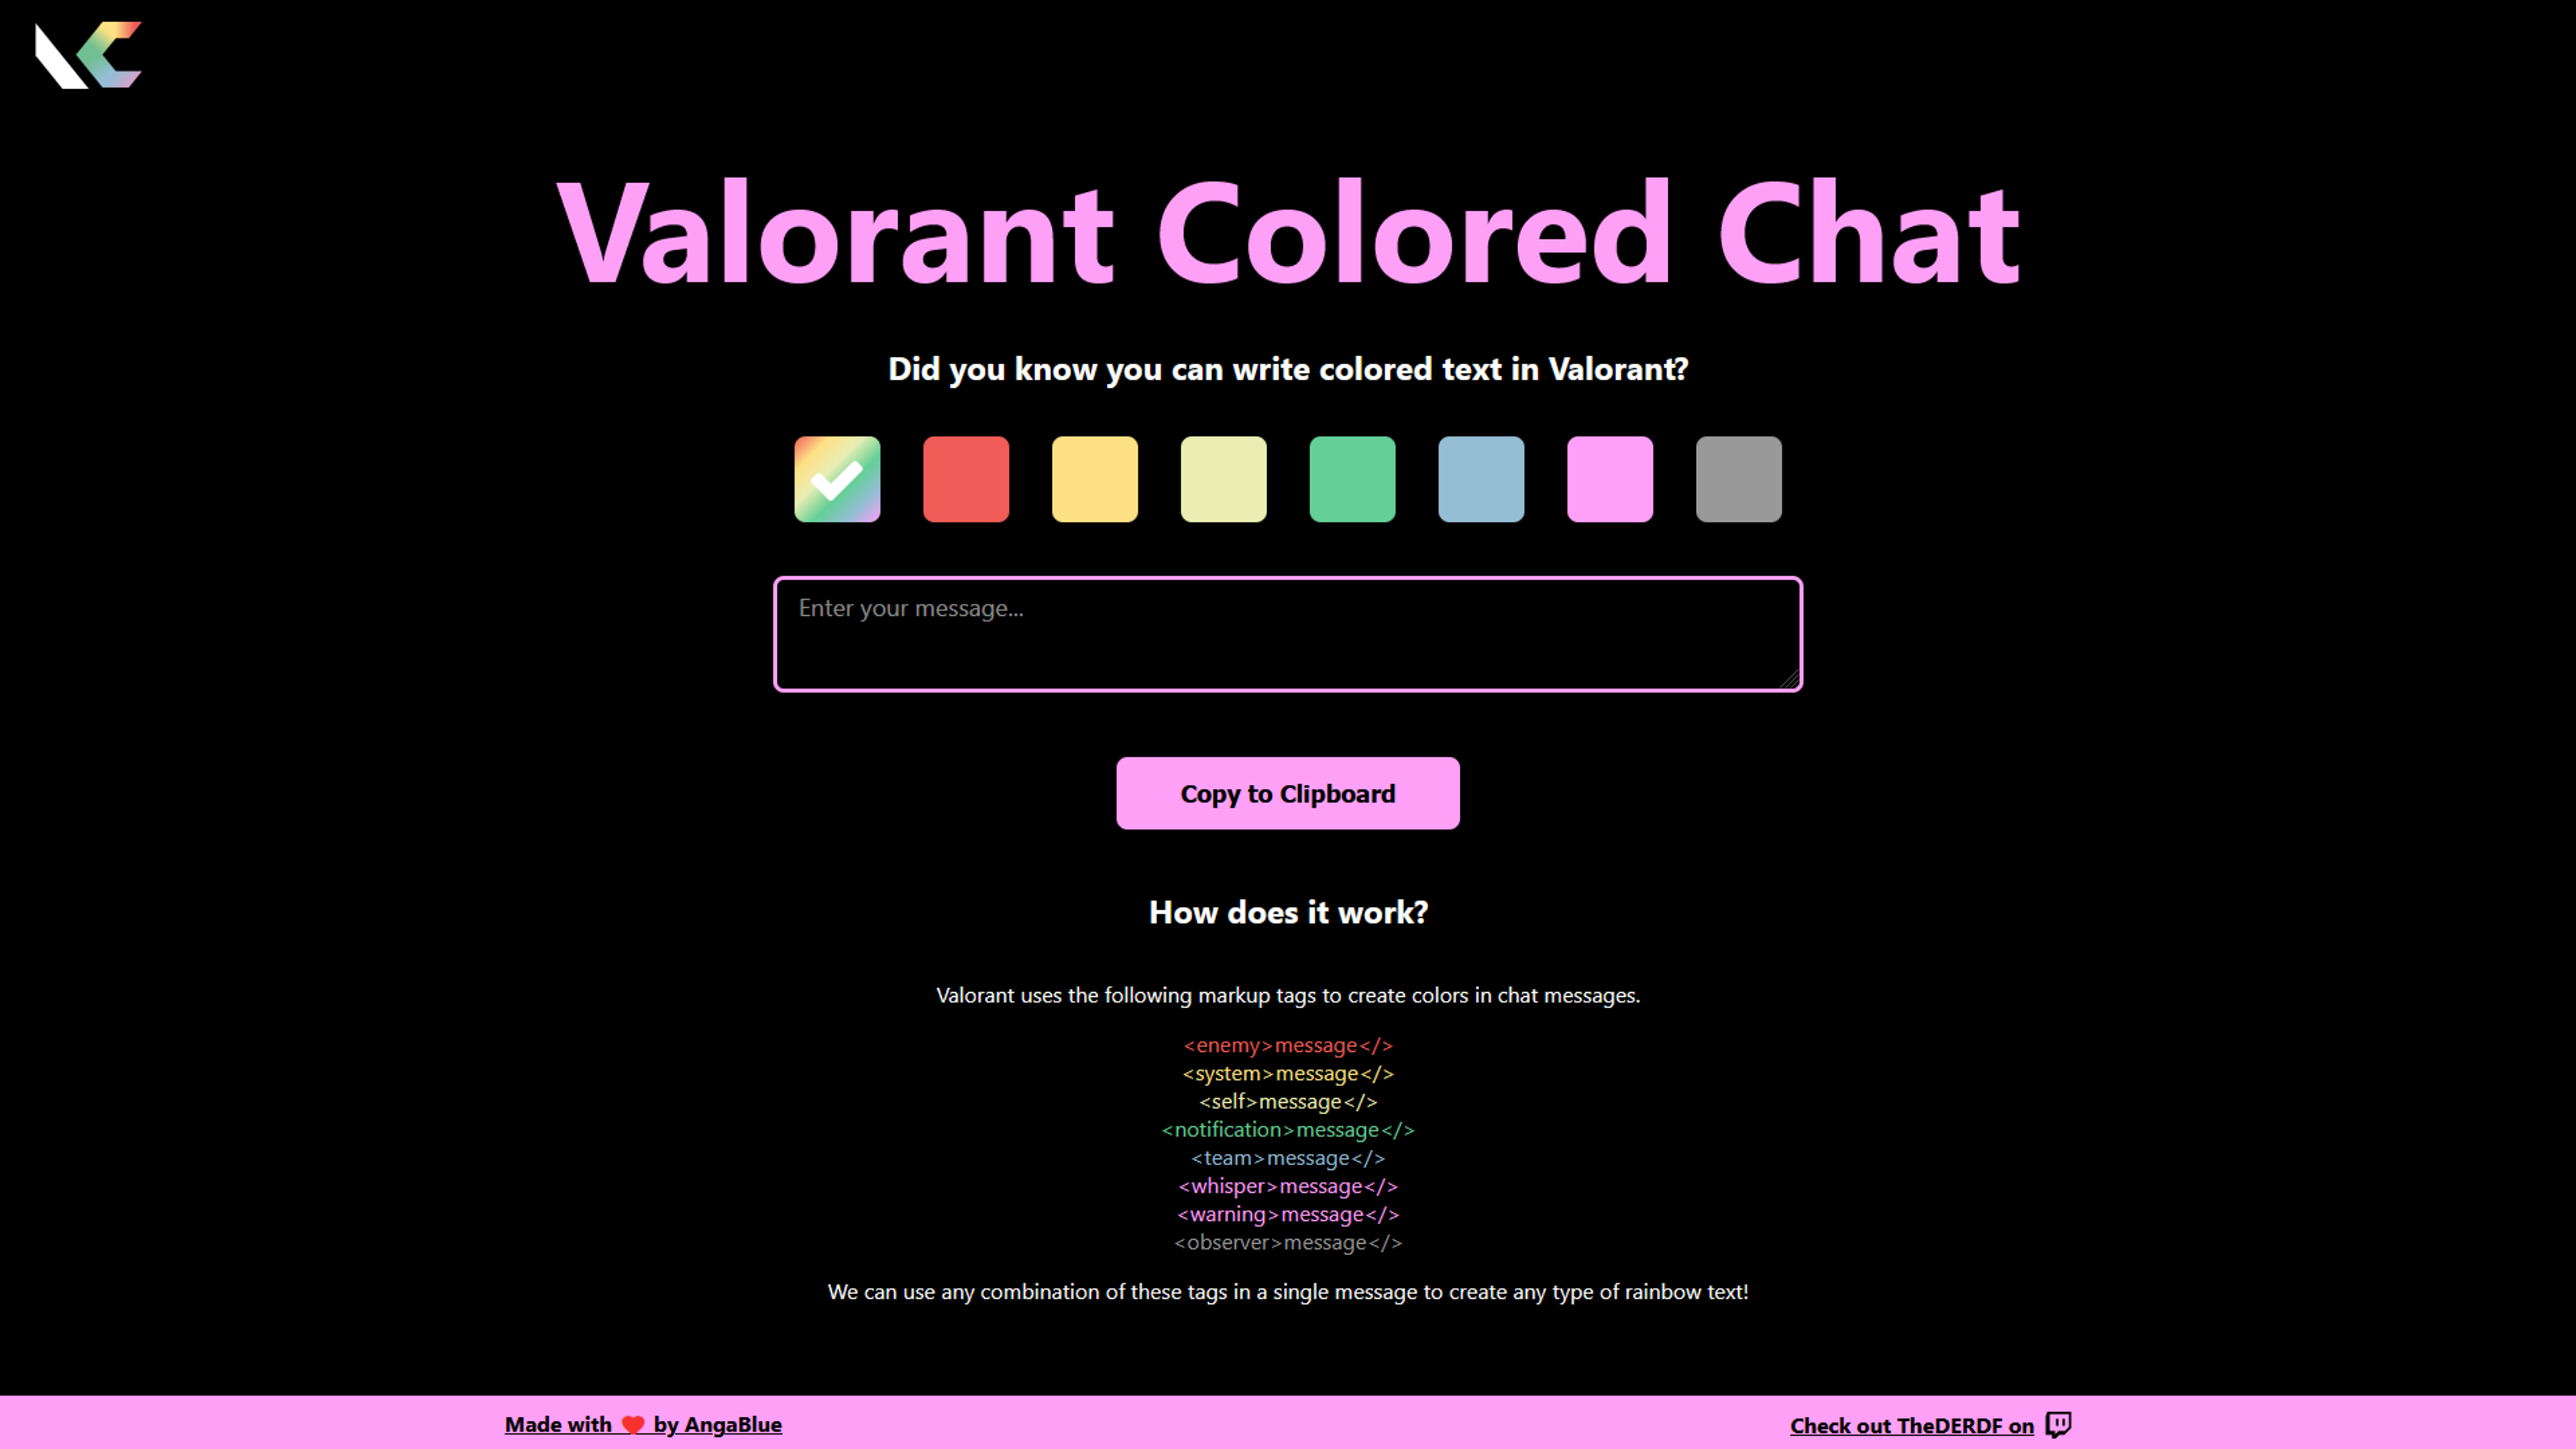 Valorant Colored Chat